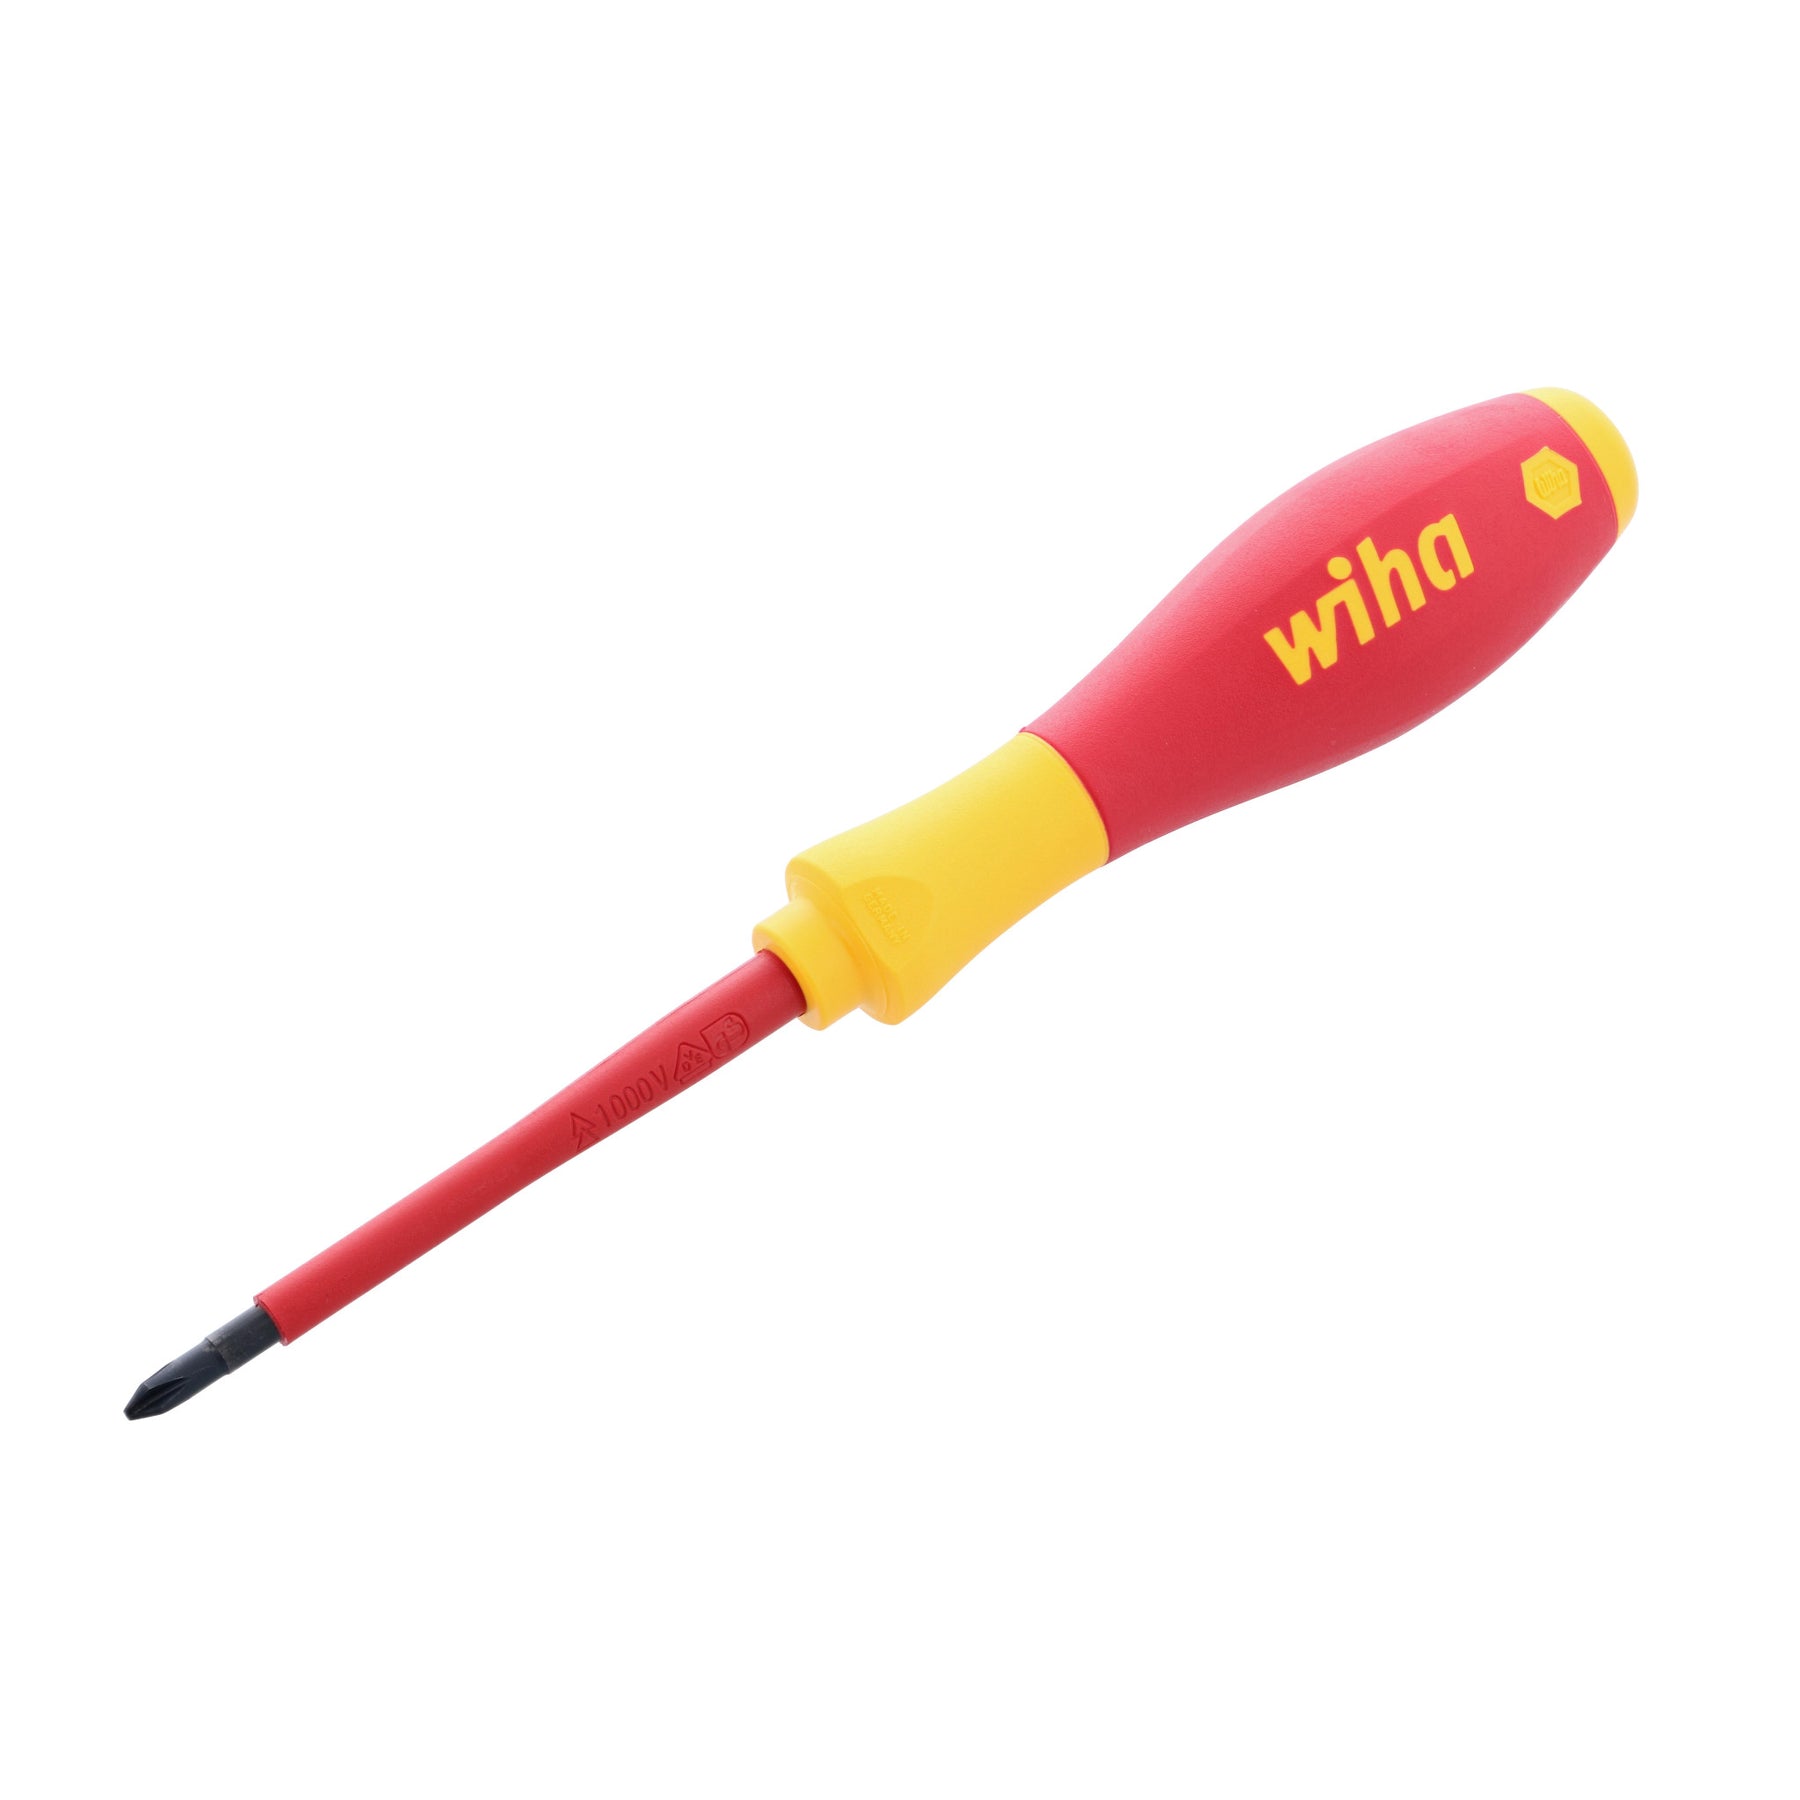 Insulated SoftFinish Phillips Screwdriver #1 x 80mm